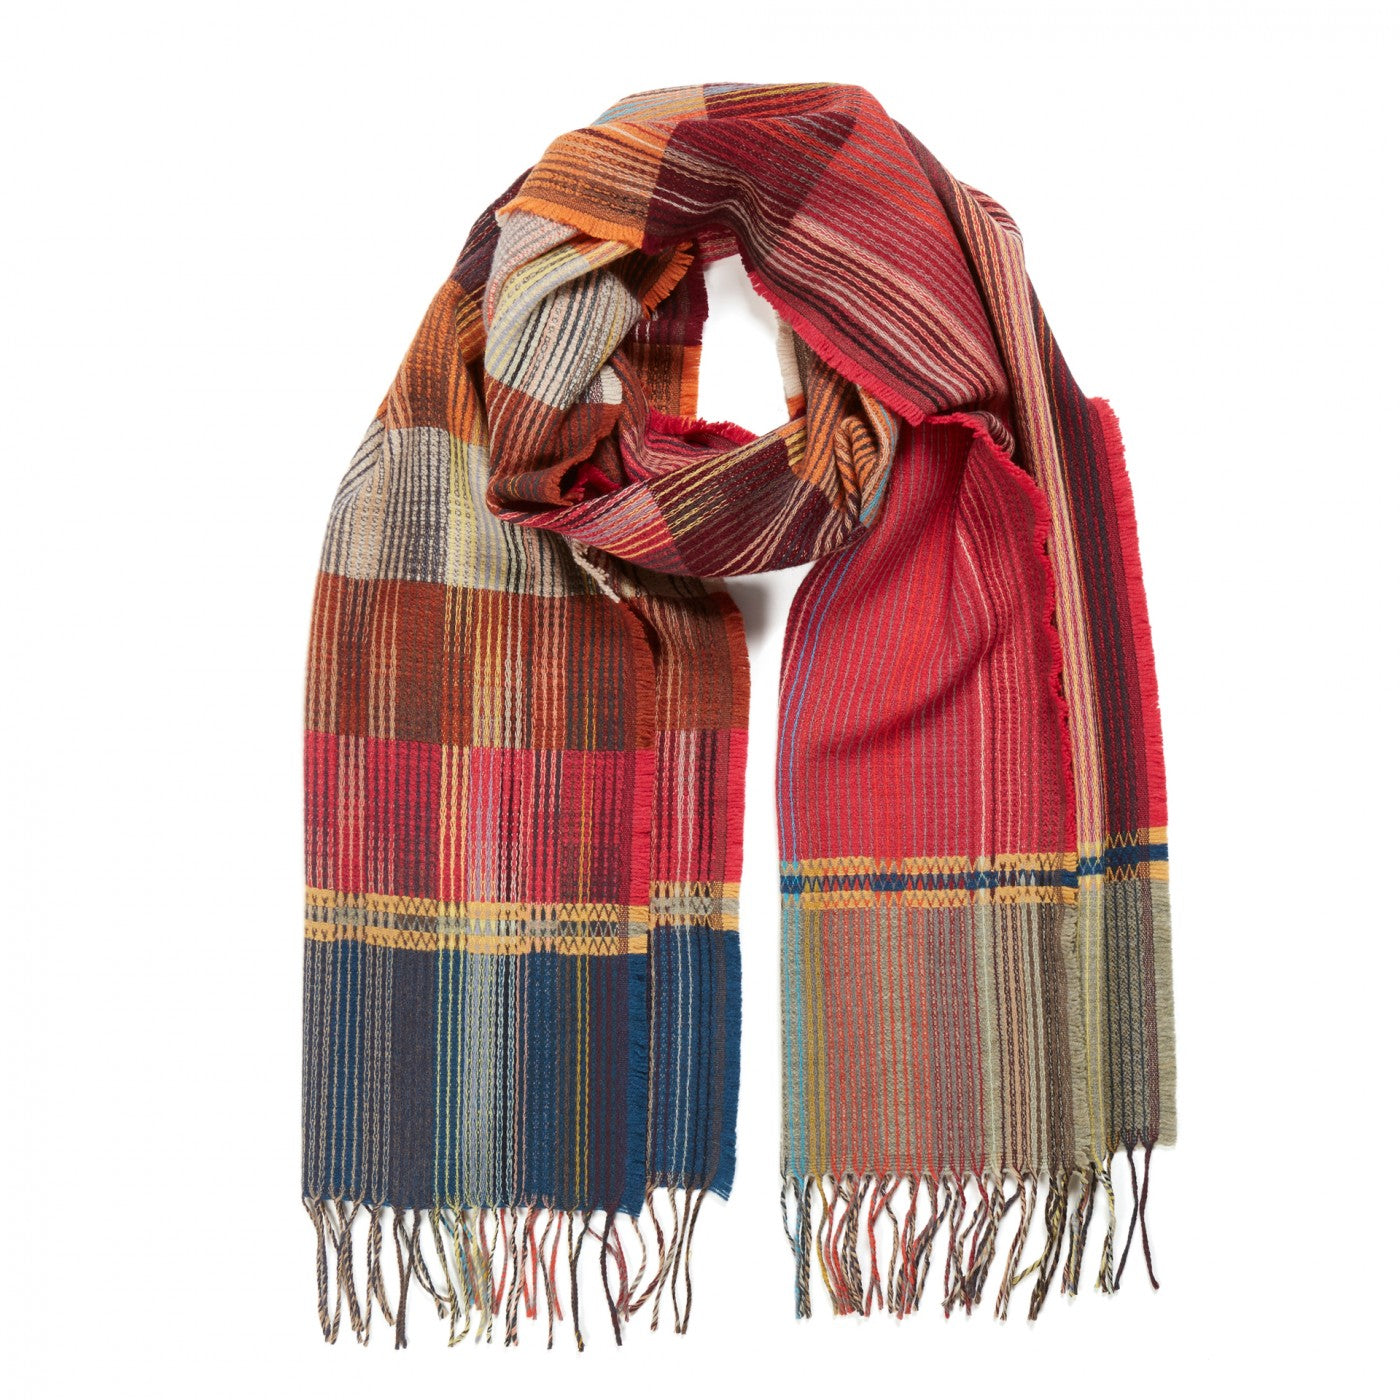 Wallace Sewell Scarf in Hortense